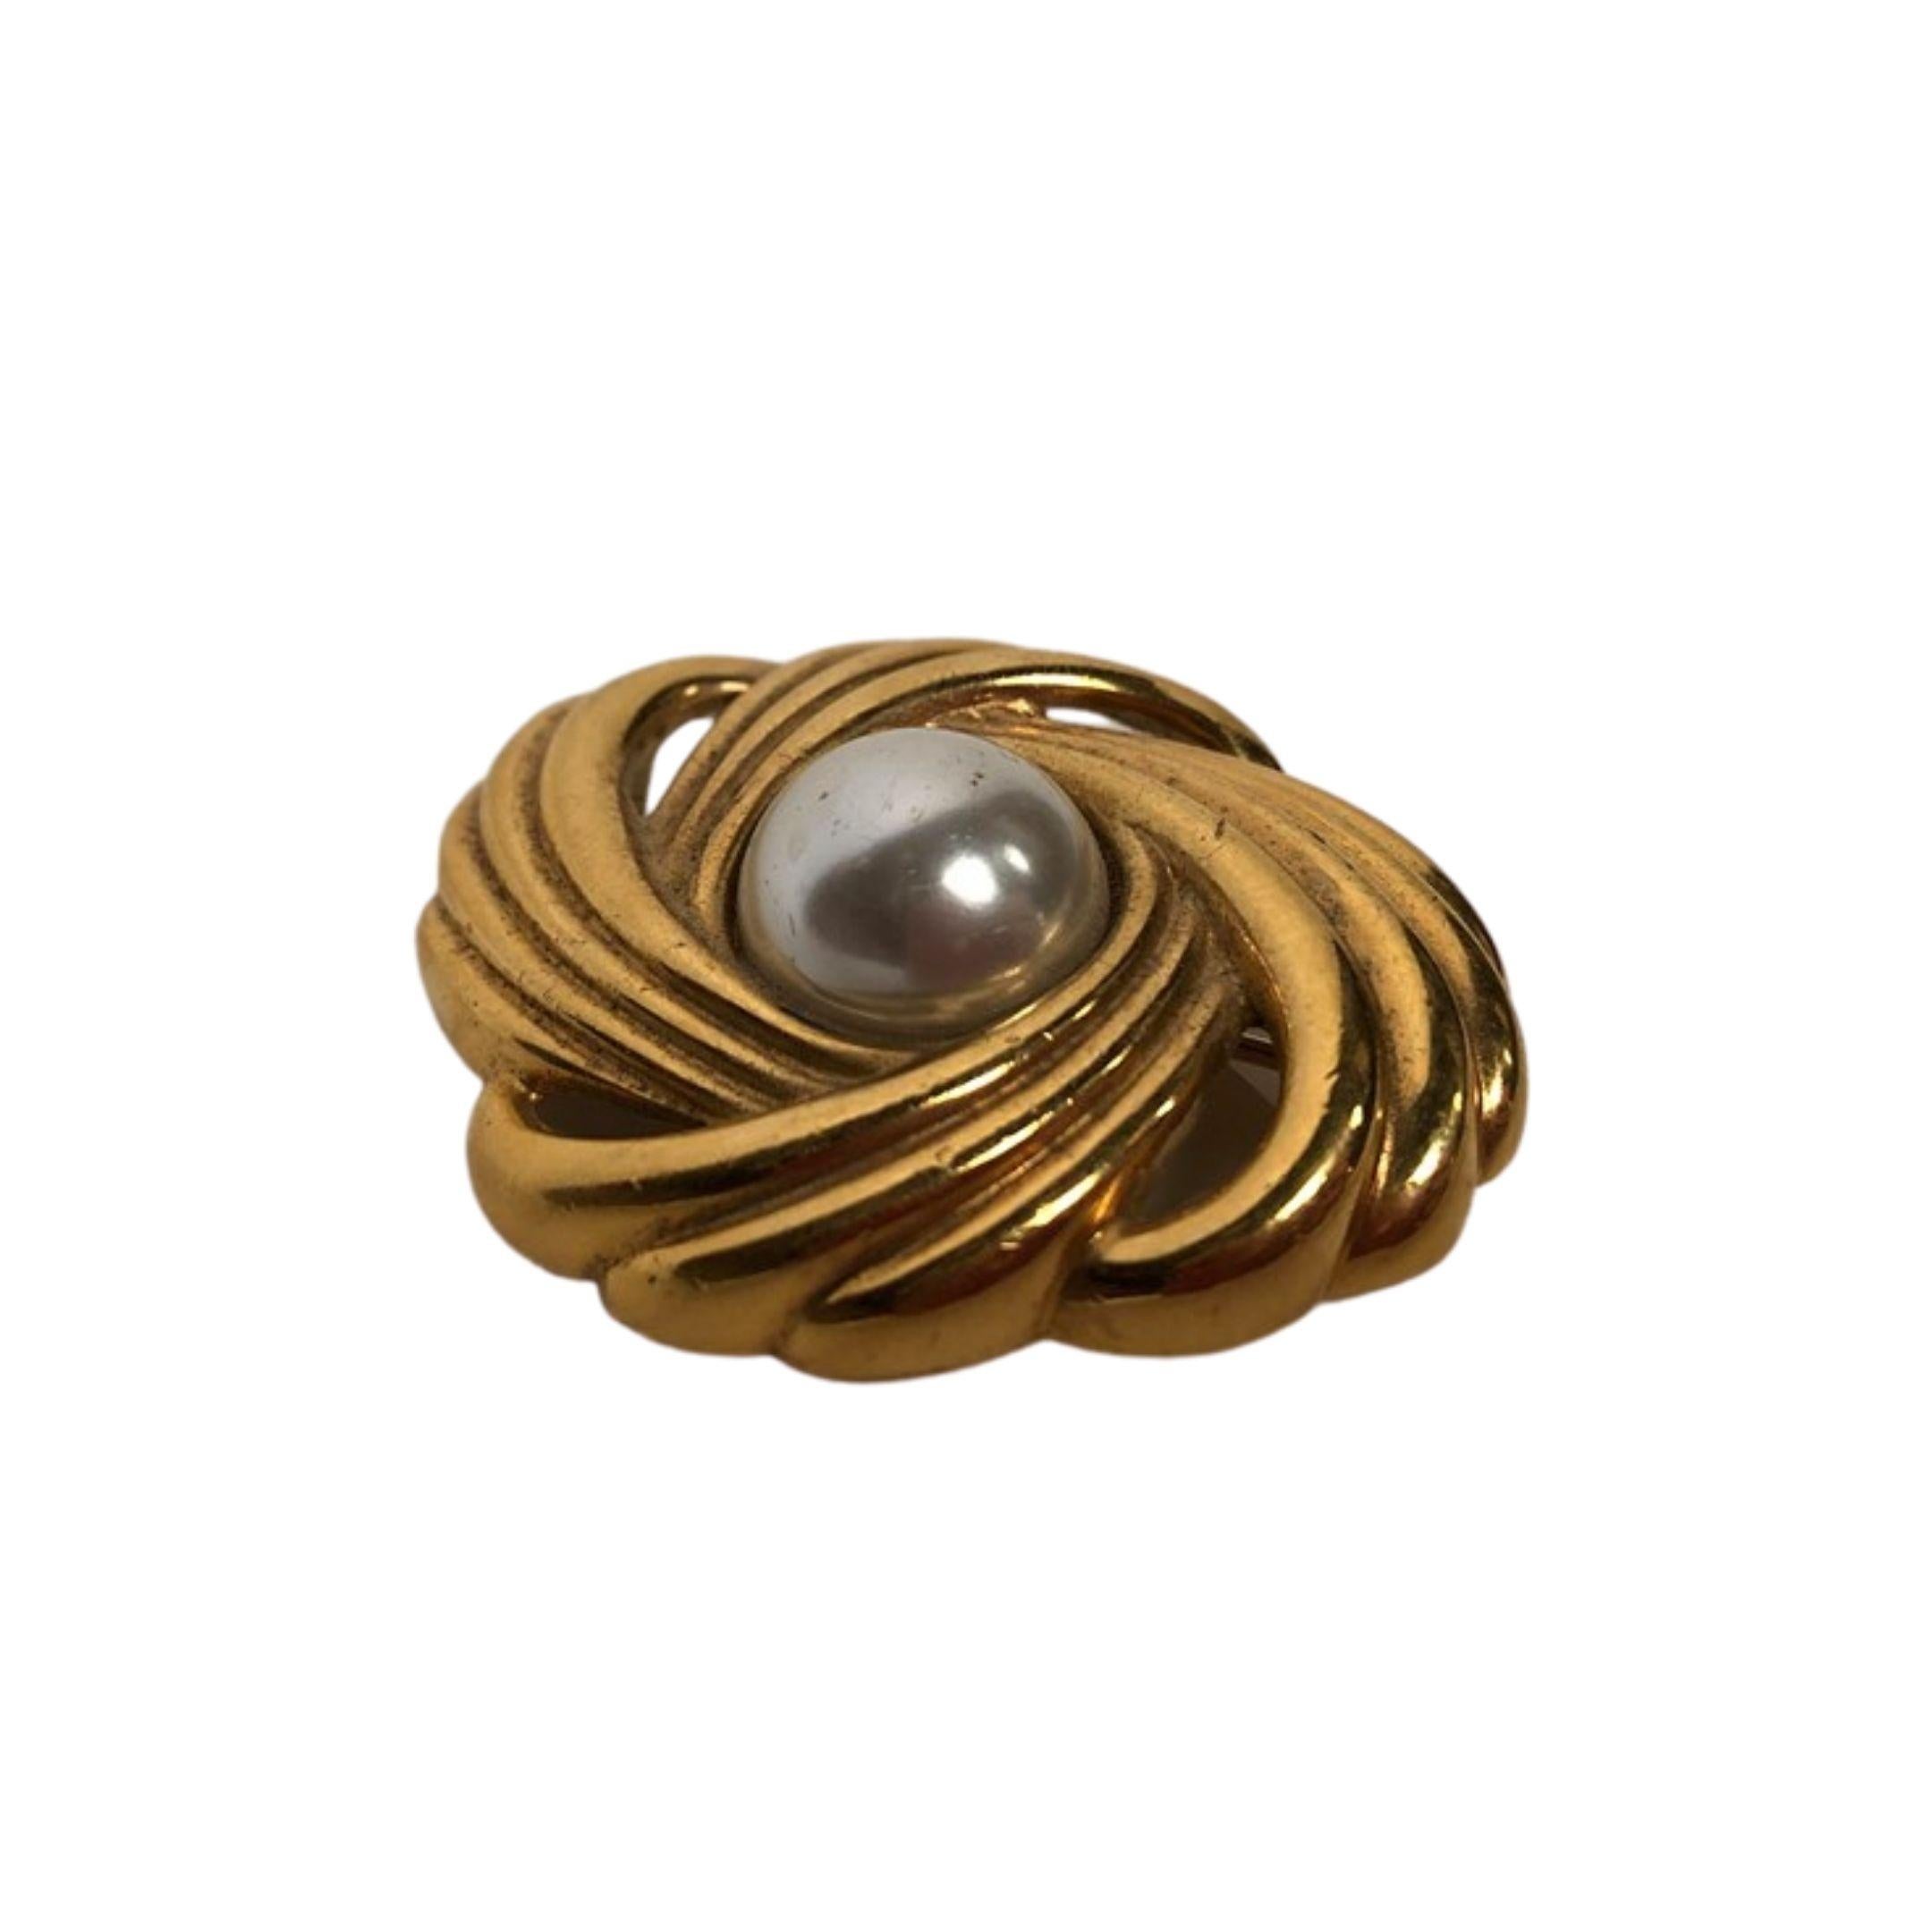 Vintage LANVIN Germany gold toned metal pin brooch with faux pearl centre.